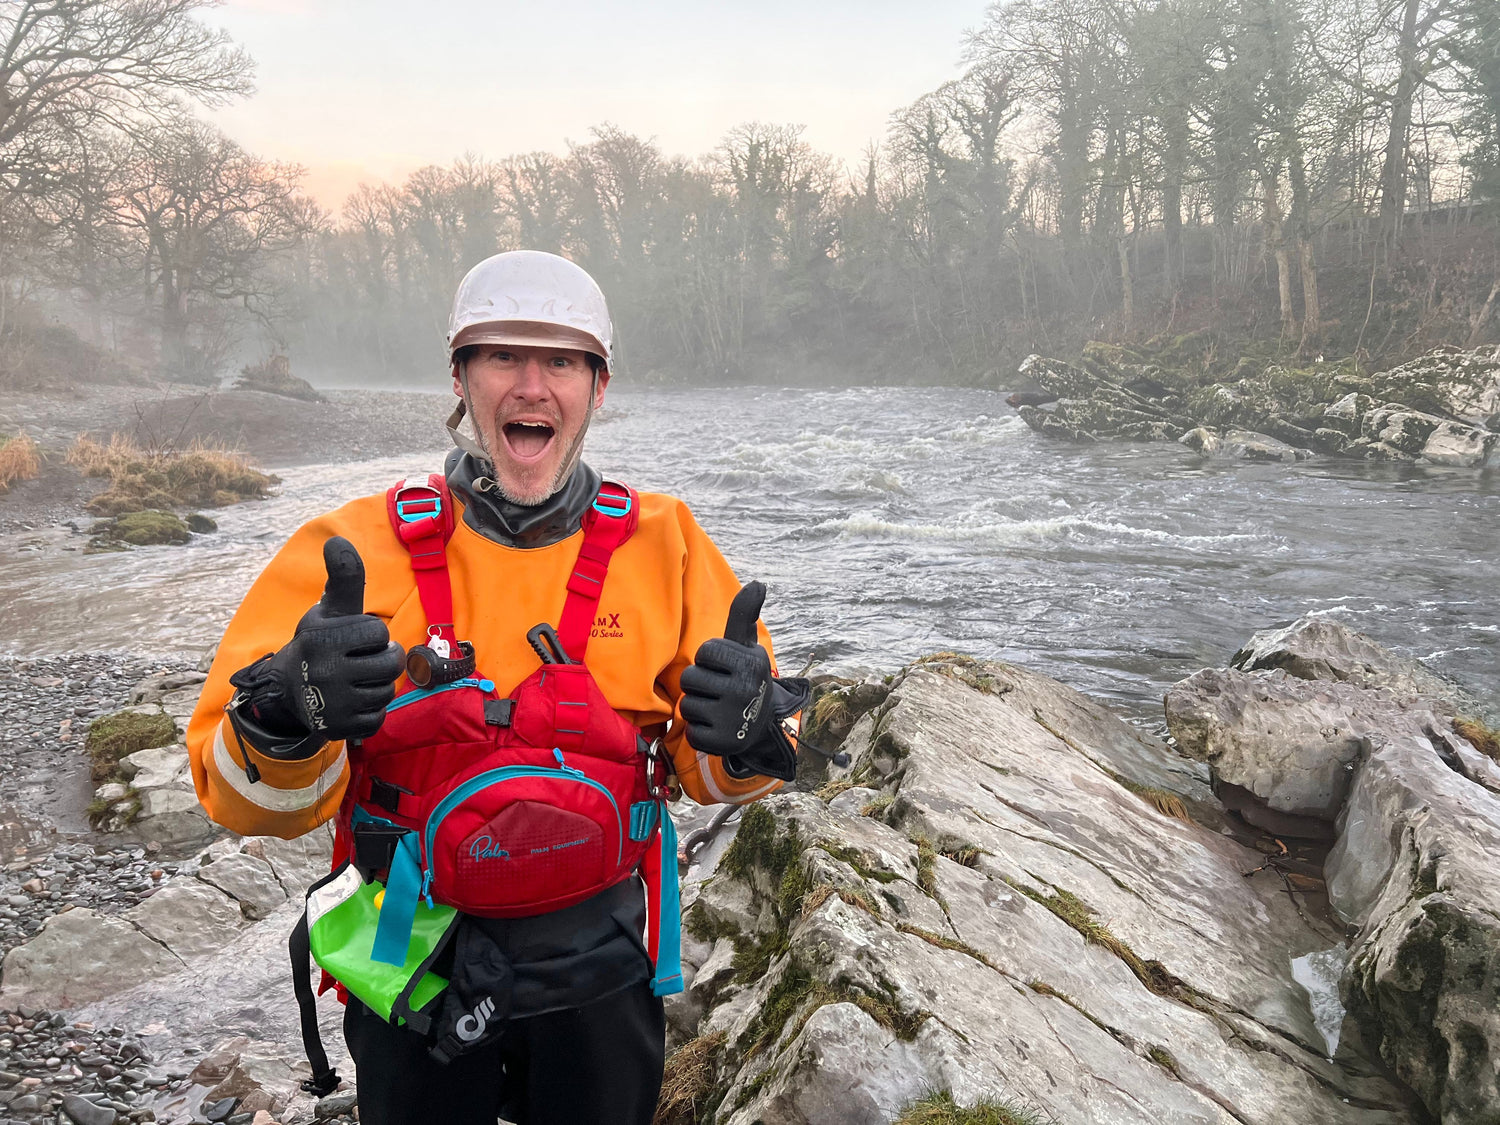 Howie crook, director of water rescue enjoying another great day on the river